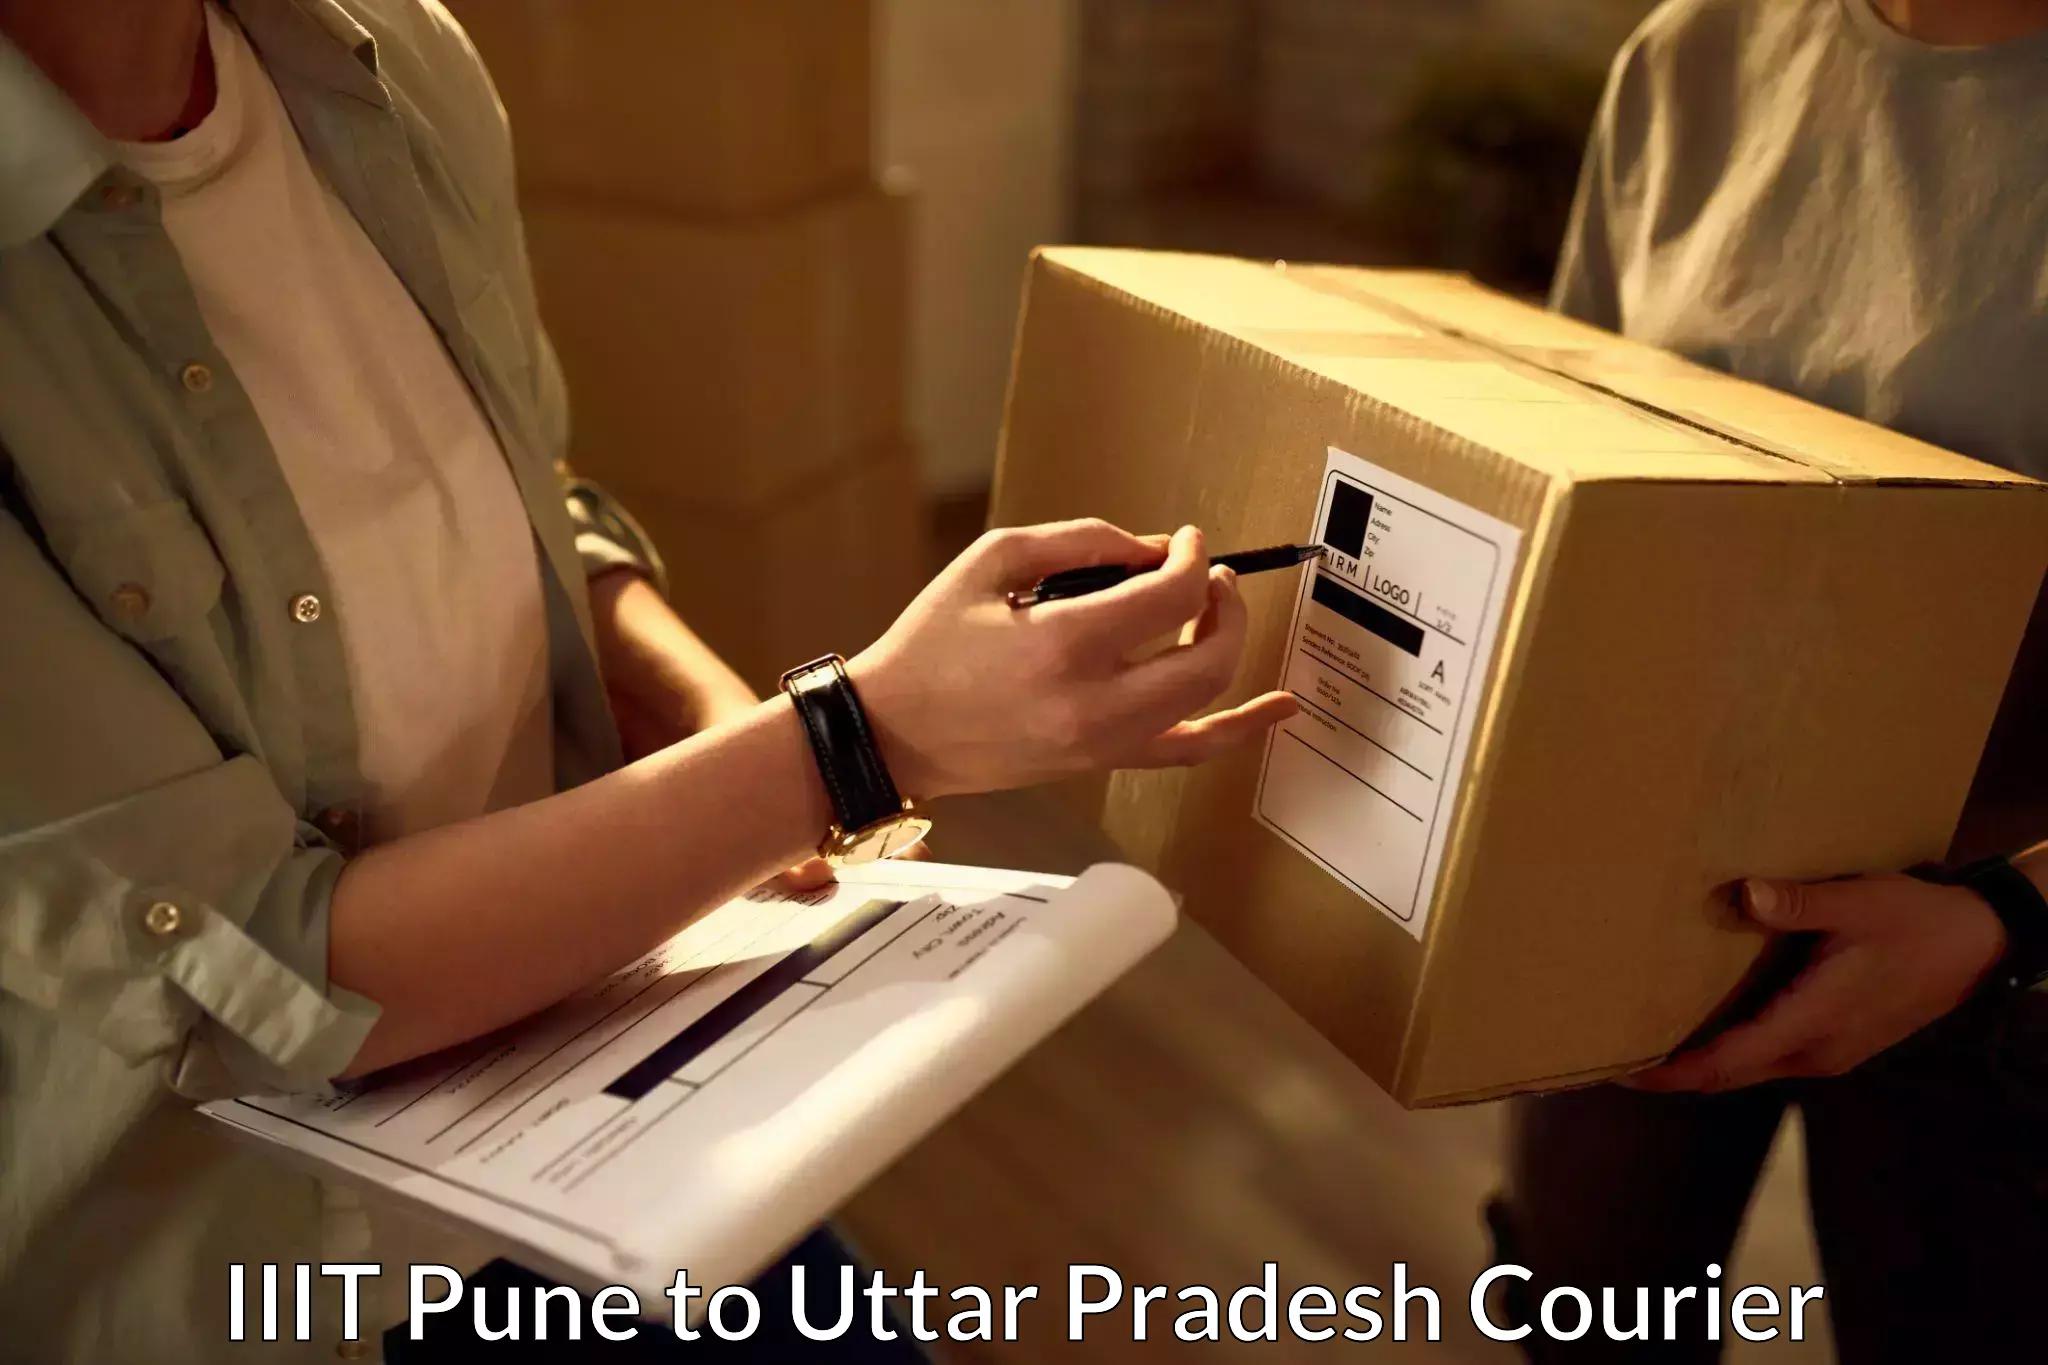 Global courier networks IIIT Pune to Rania